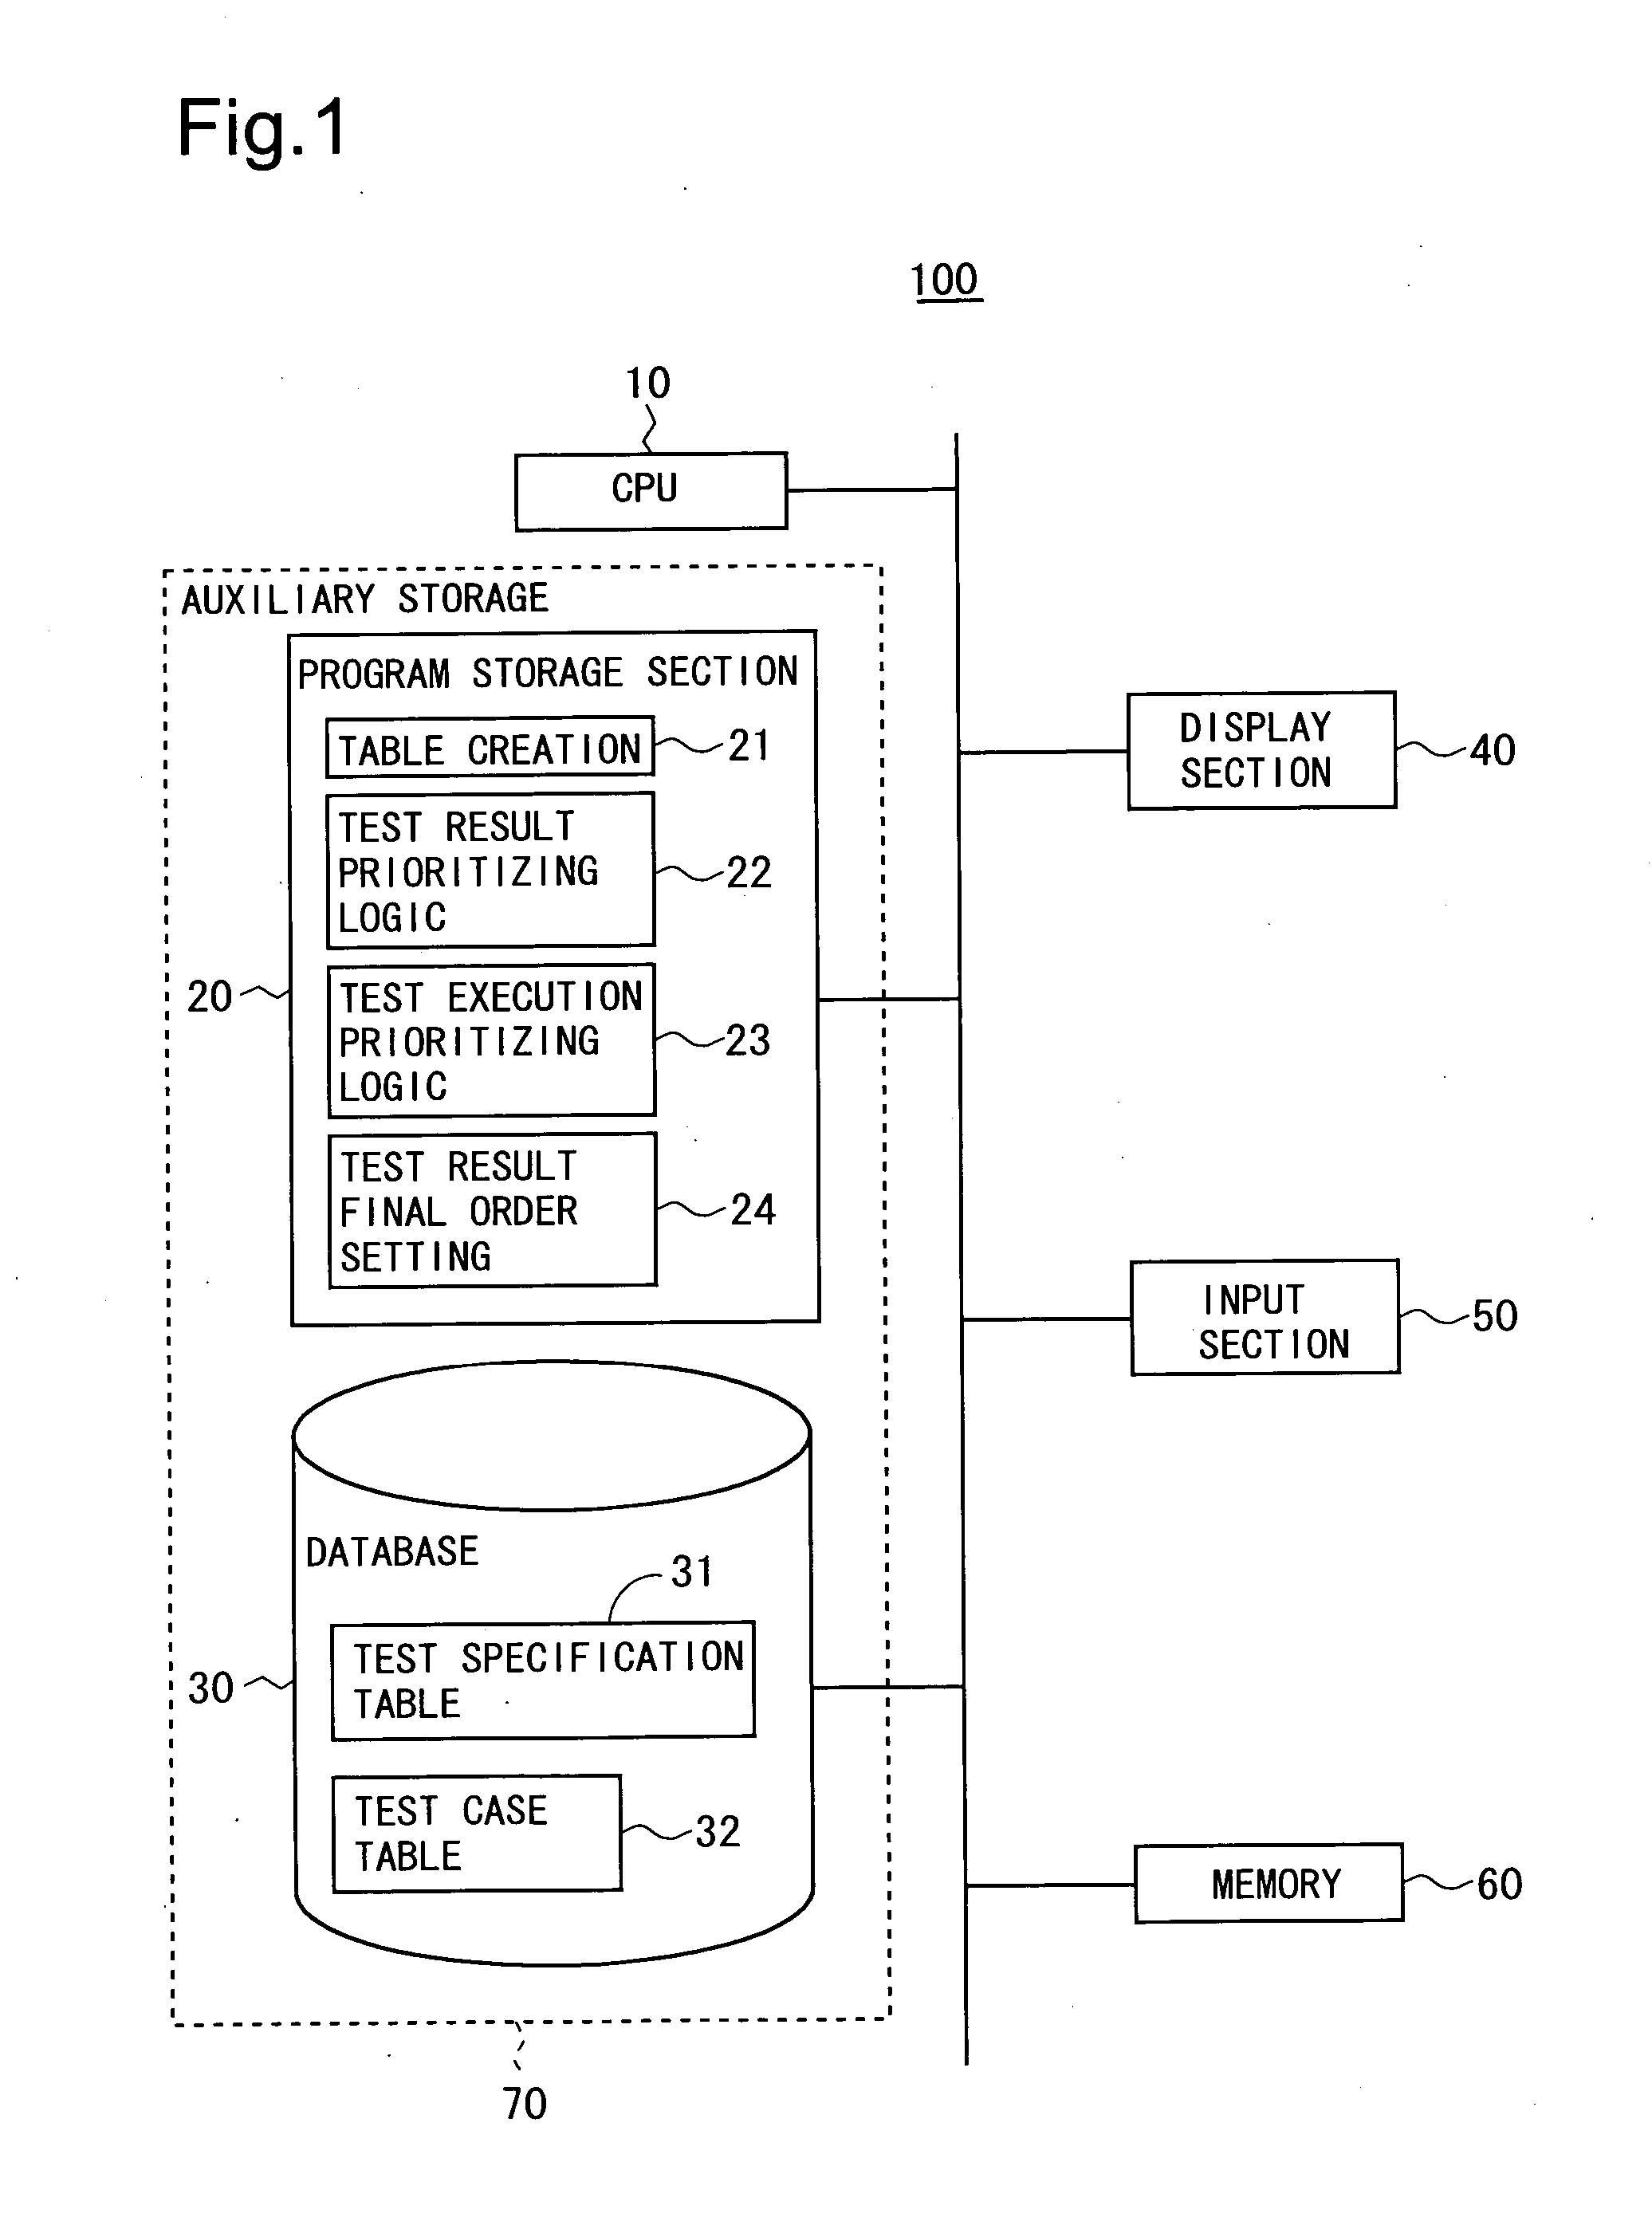 Test case extraction apparatus, program and method for software system